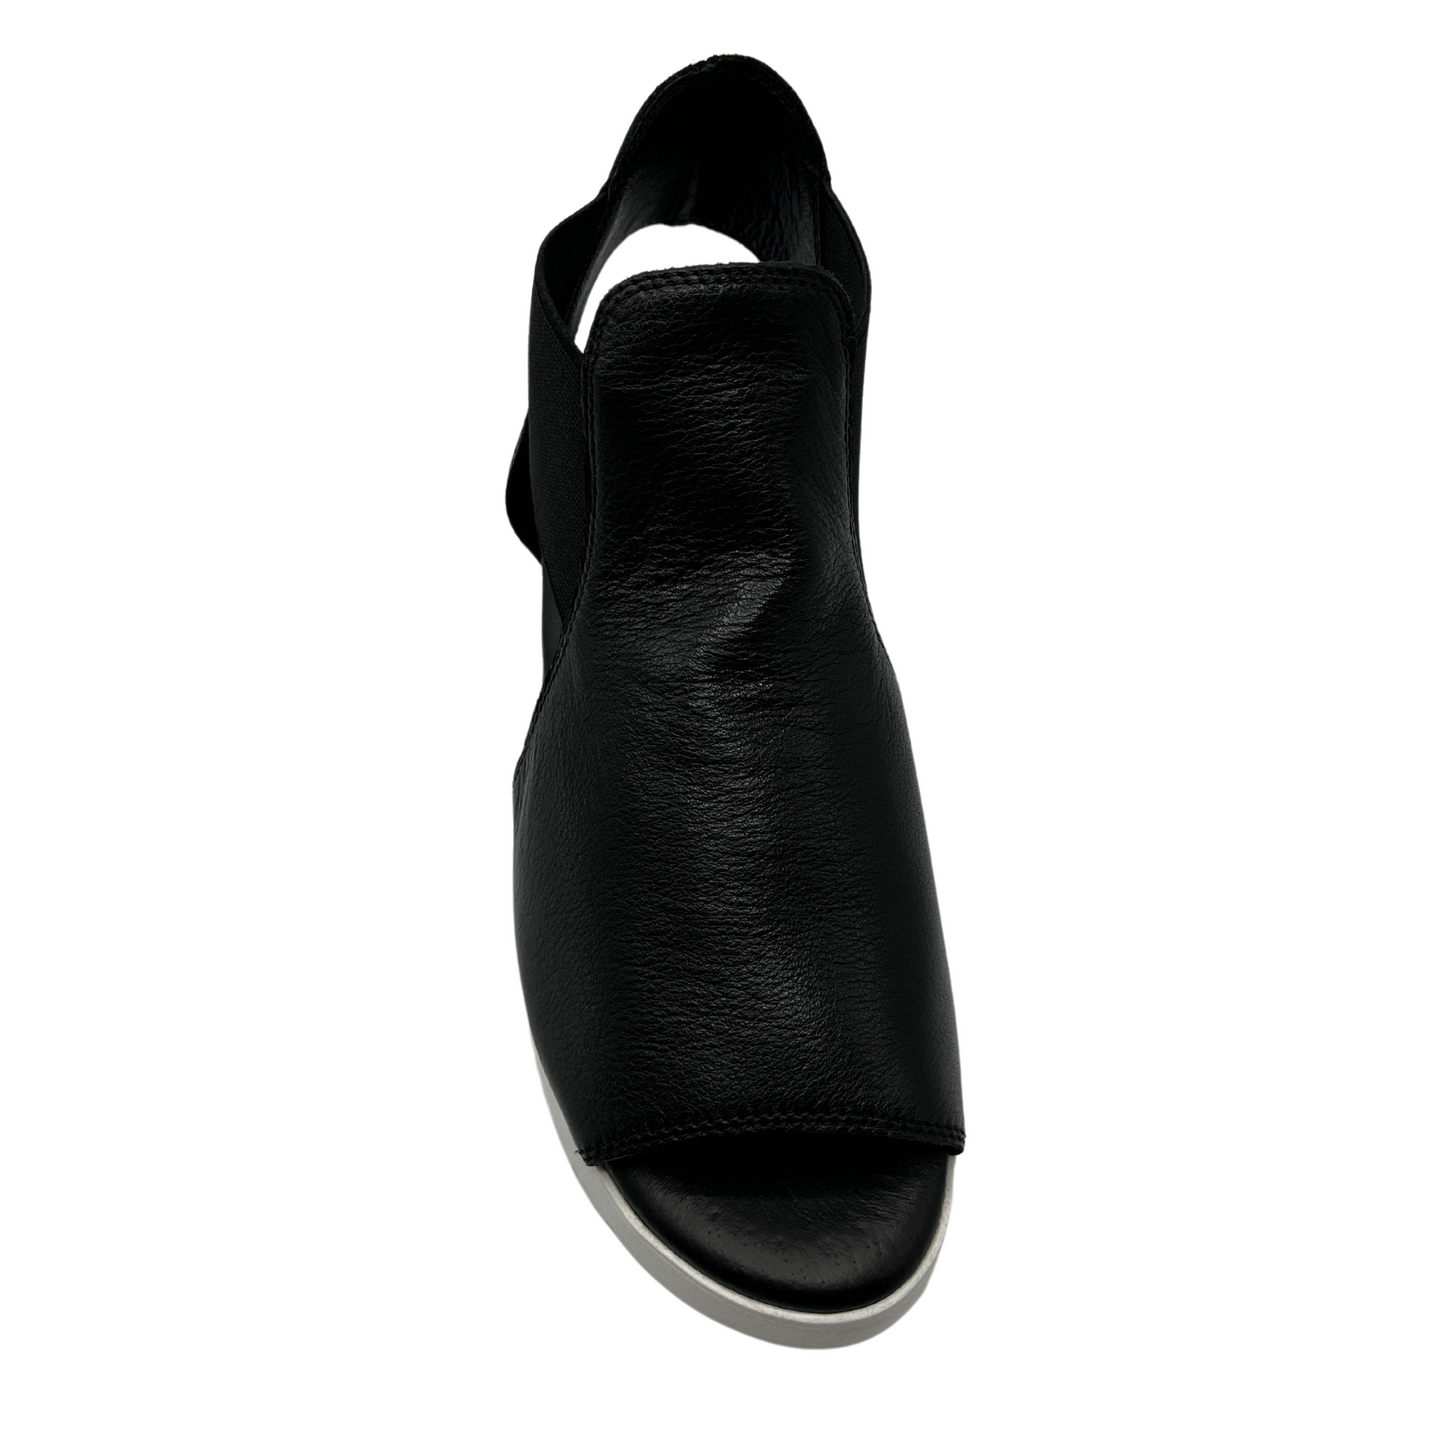 Top view of black leather sandal with elastic side straps and white outsole